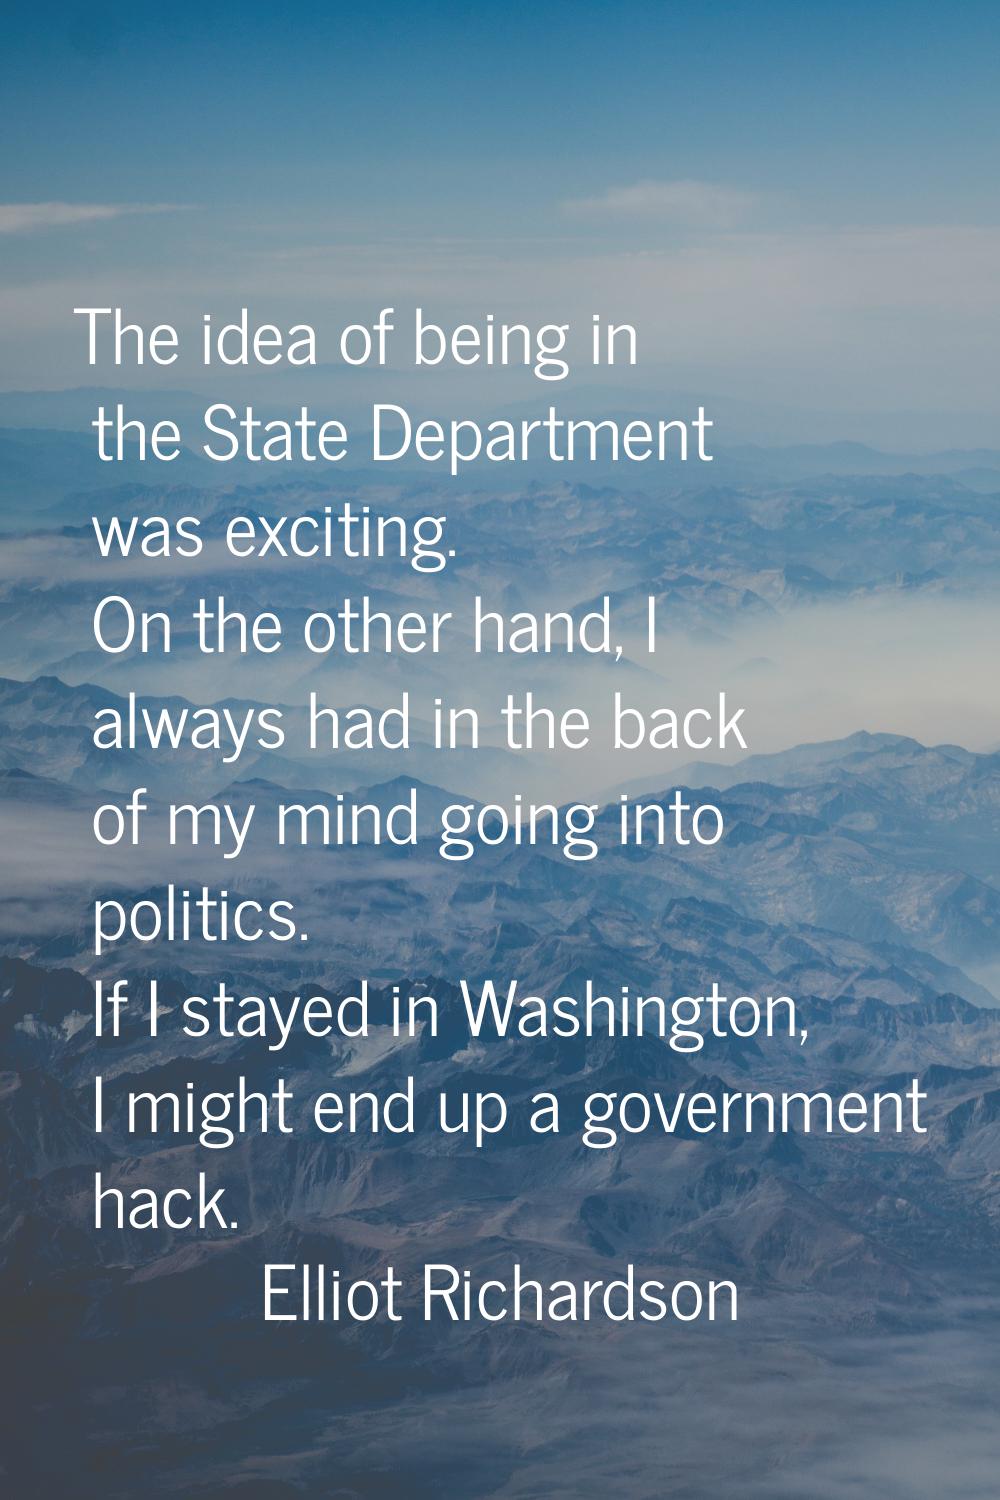 The idea of being in the State Department was exciting. On the other hand, I always had in the back